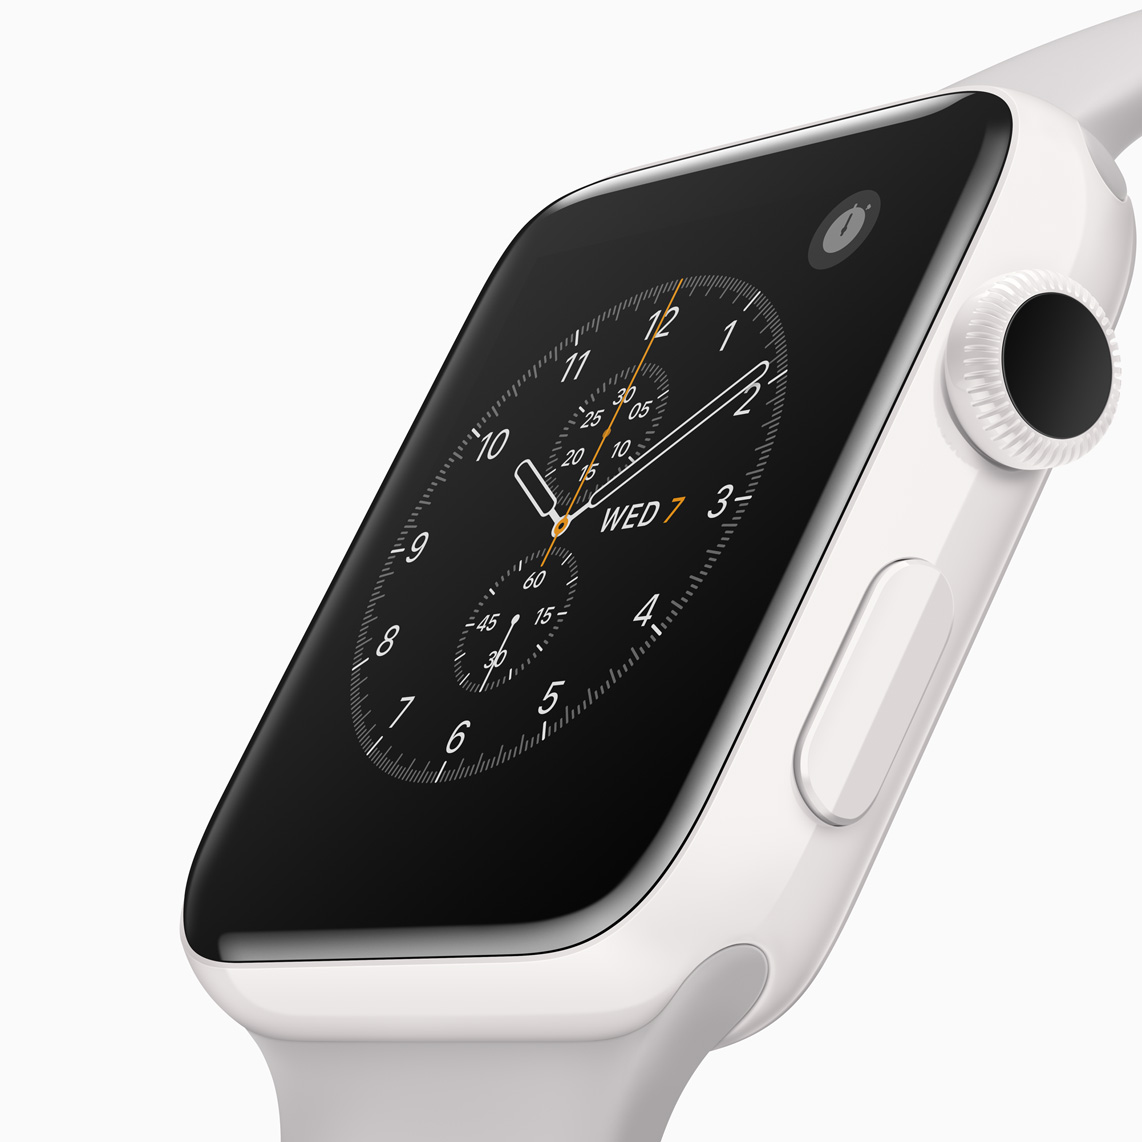 The apple watch 2 with ceramic case.